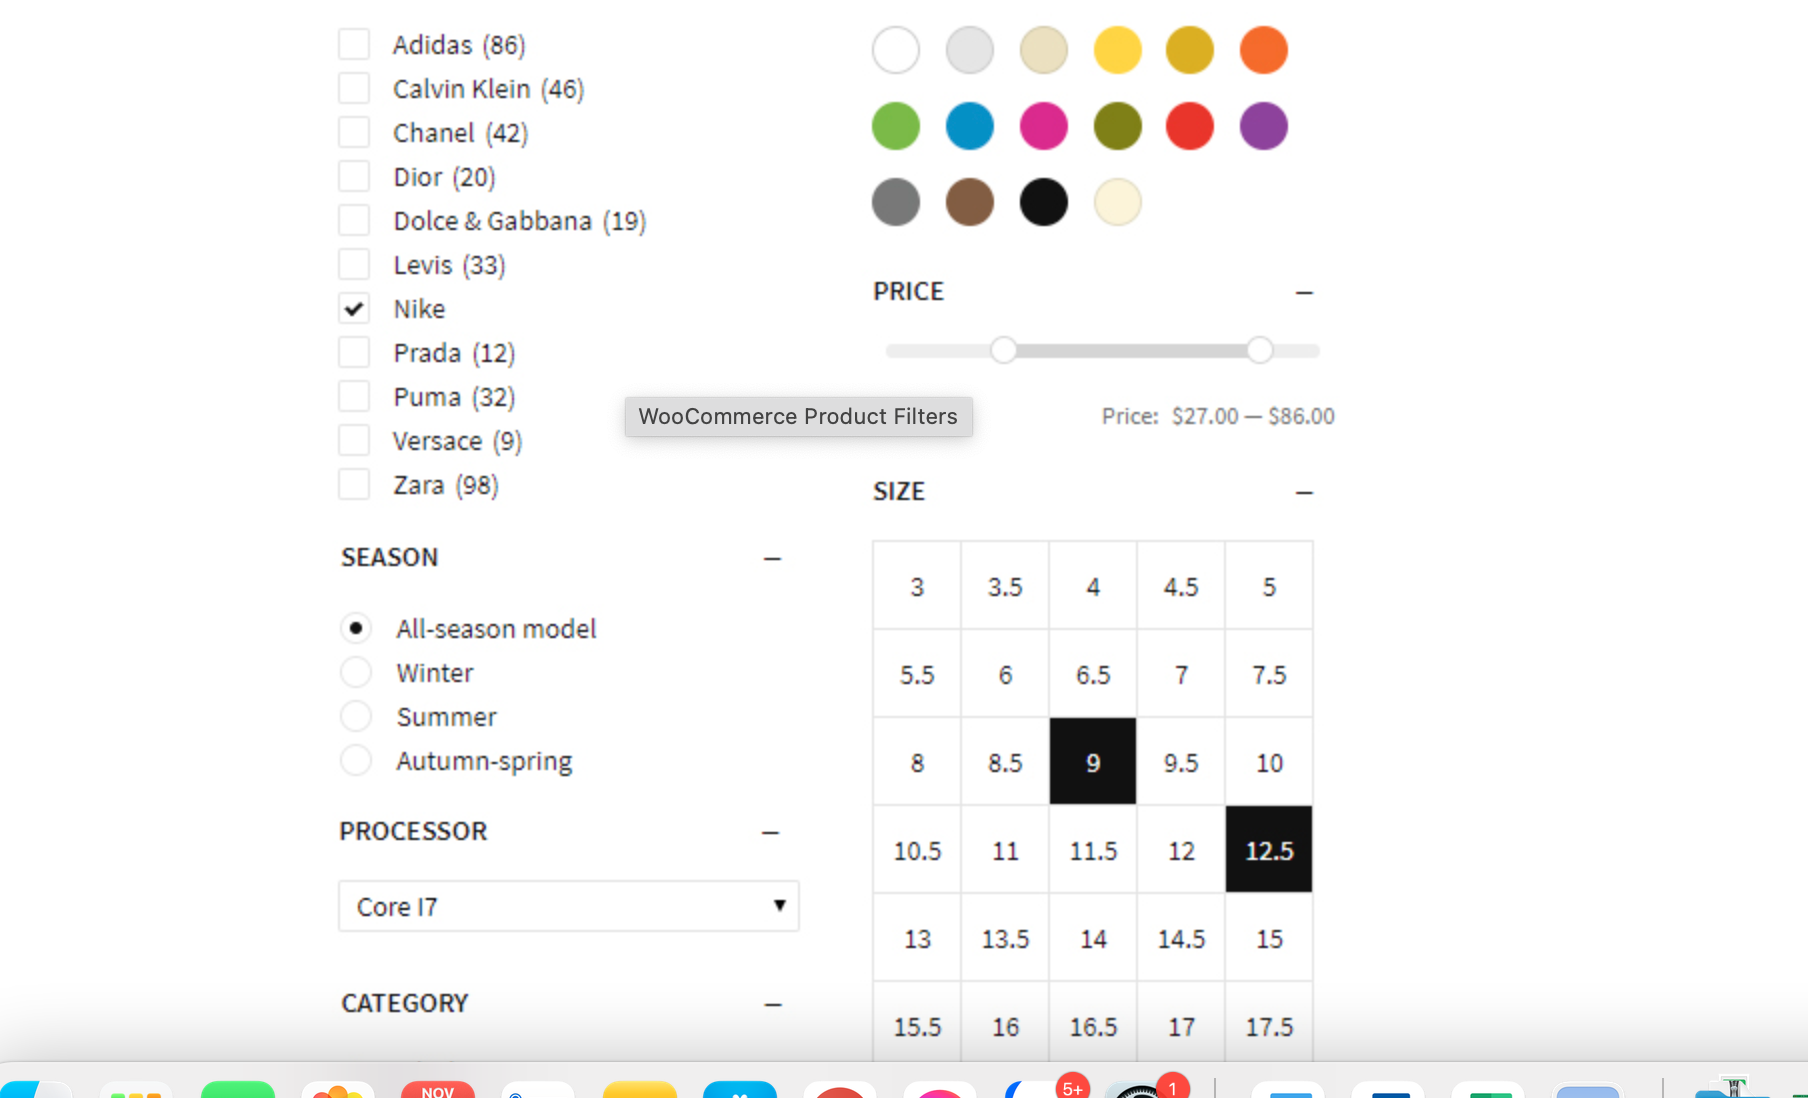 The rich customization possibilities set this plugin apart from the competition.